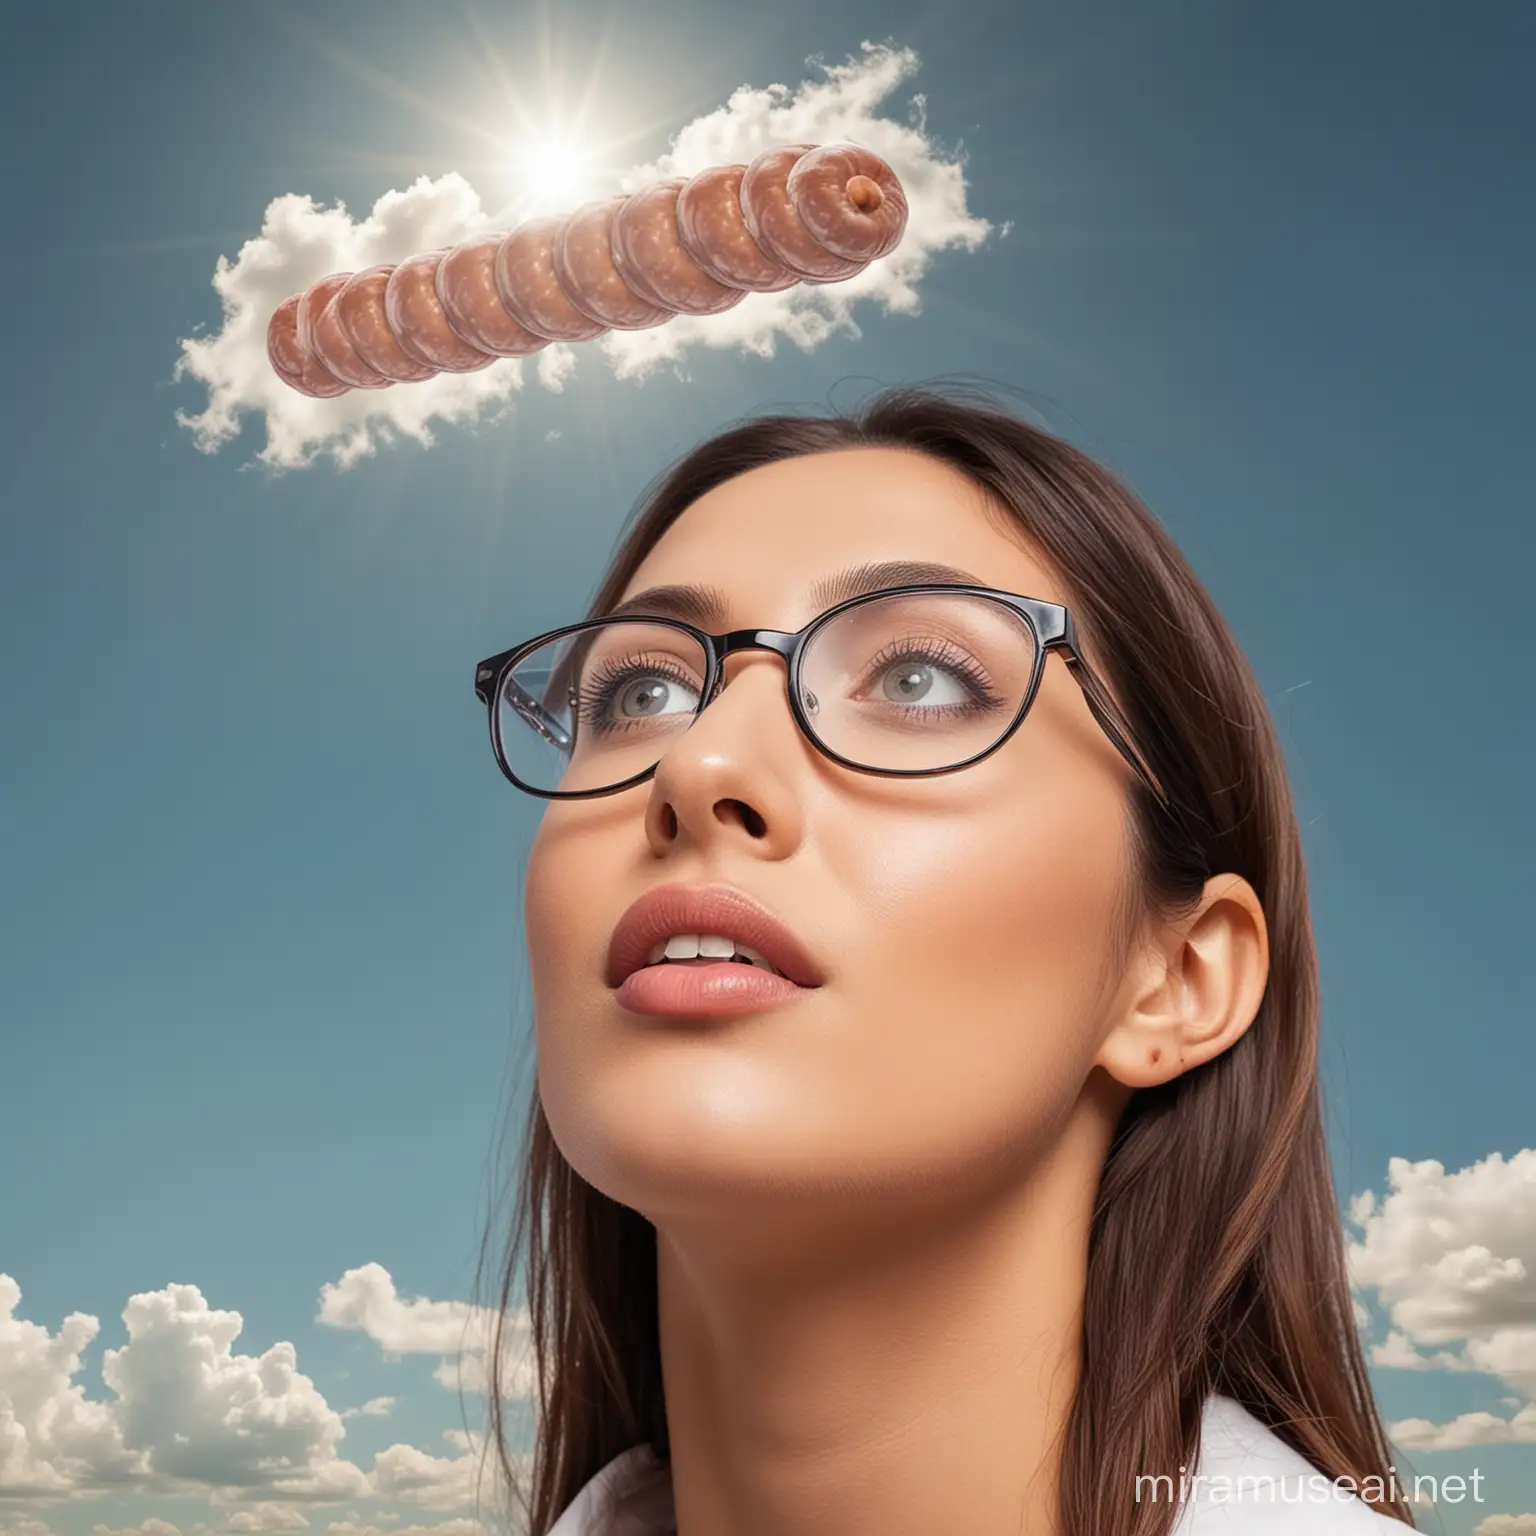 Women Admiring Sky with Sausage Glasses